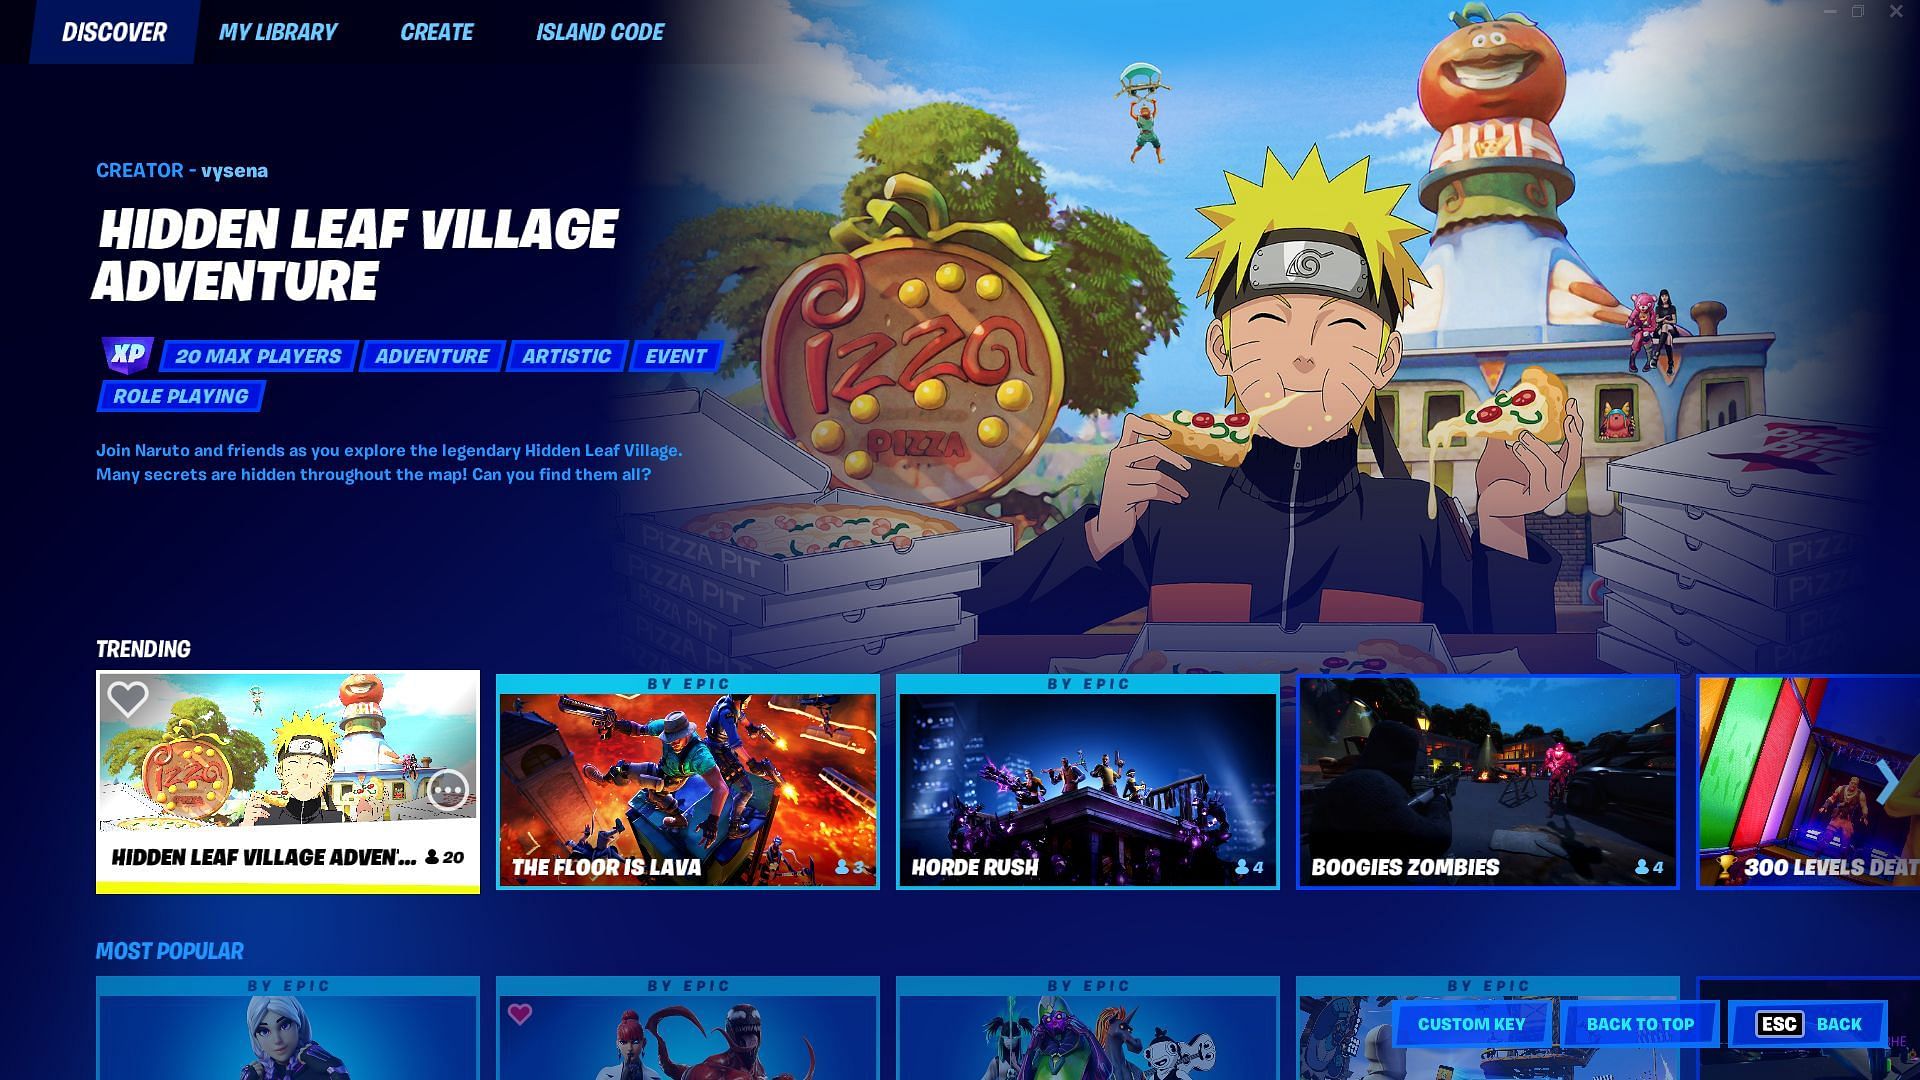 Hidden Leaf Village Adventure can be found on the extreme left in the Discovery Tab (Image via Fortnite/Epic Games)